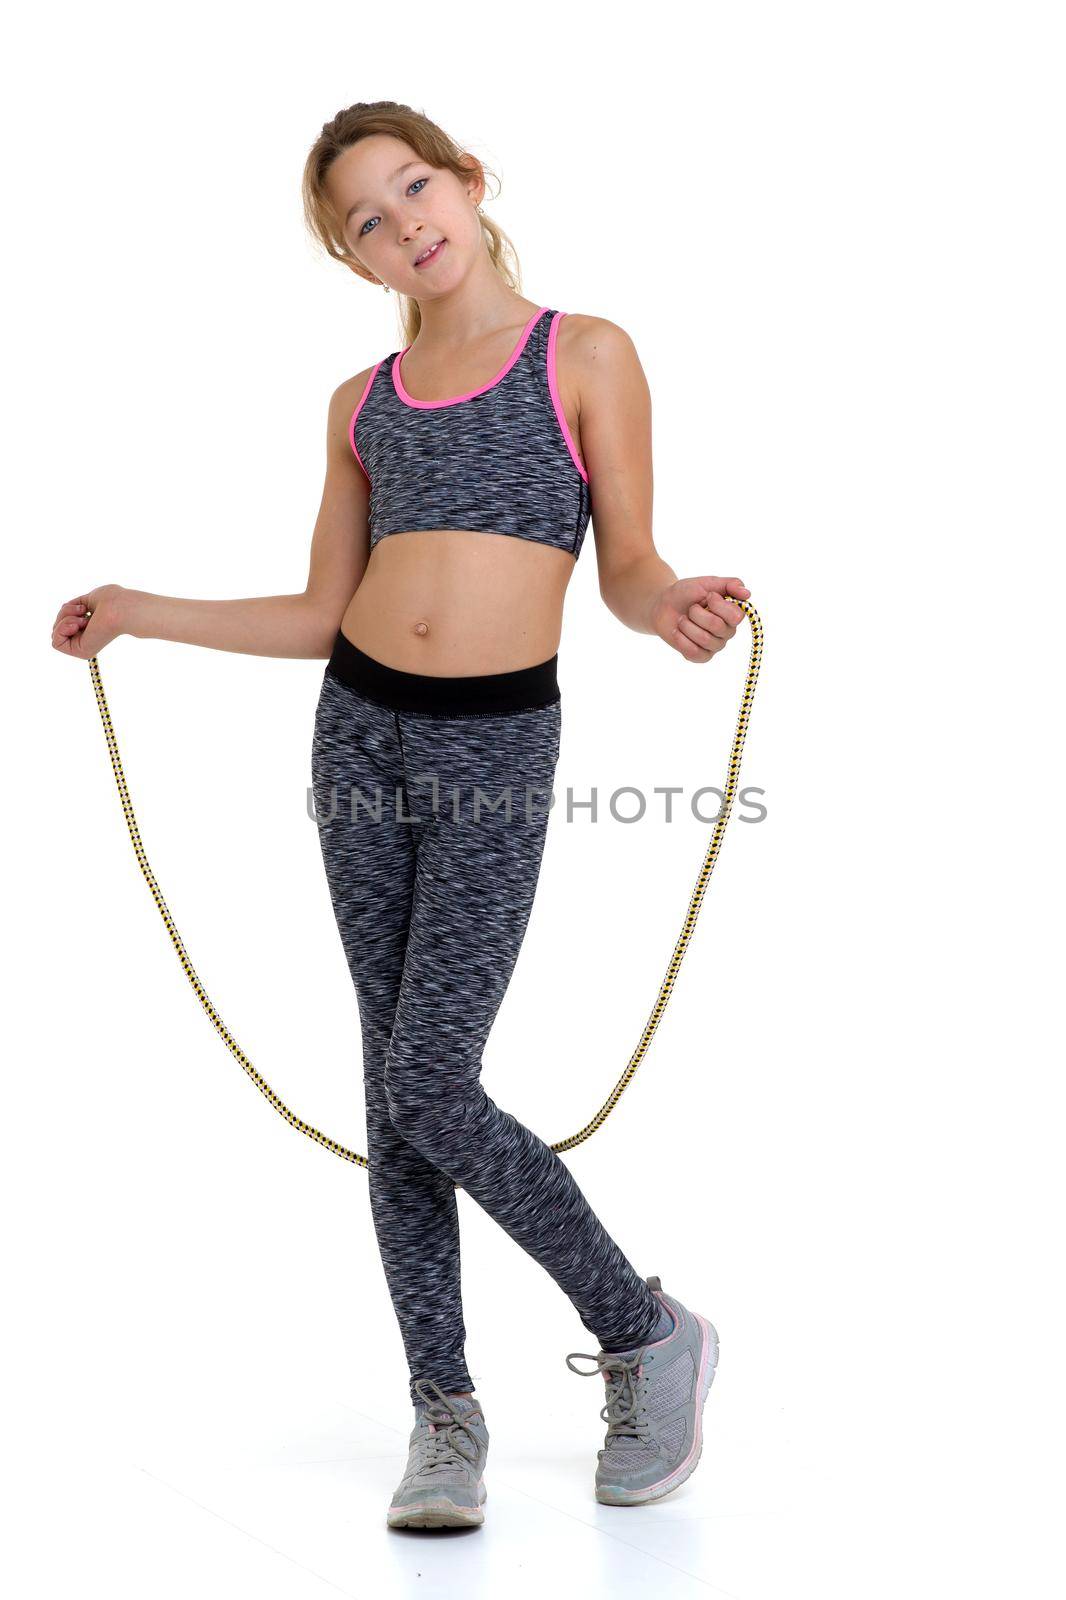 Teenage girl performing exercise with jumping rope. Cheerful girl gymnast wearing sportswear doing sports against white background. Active healthy lifestyle concept